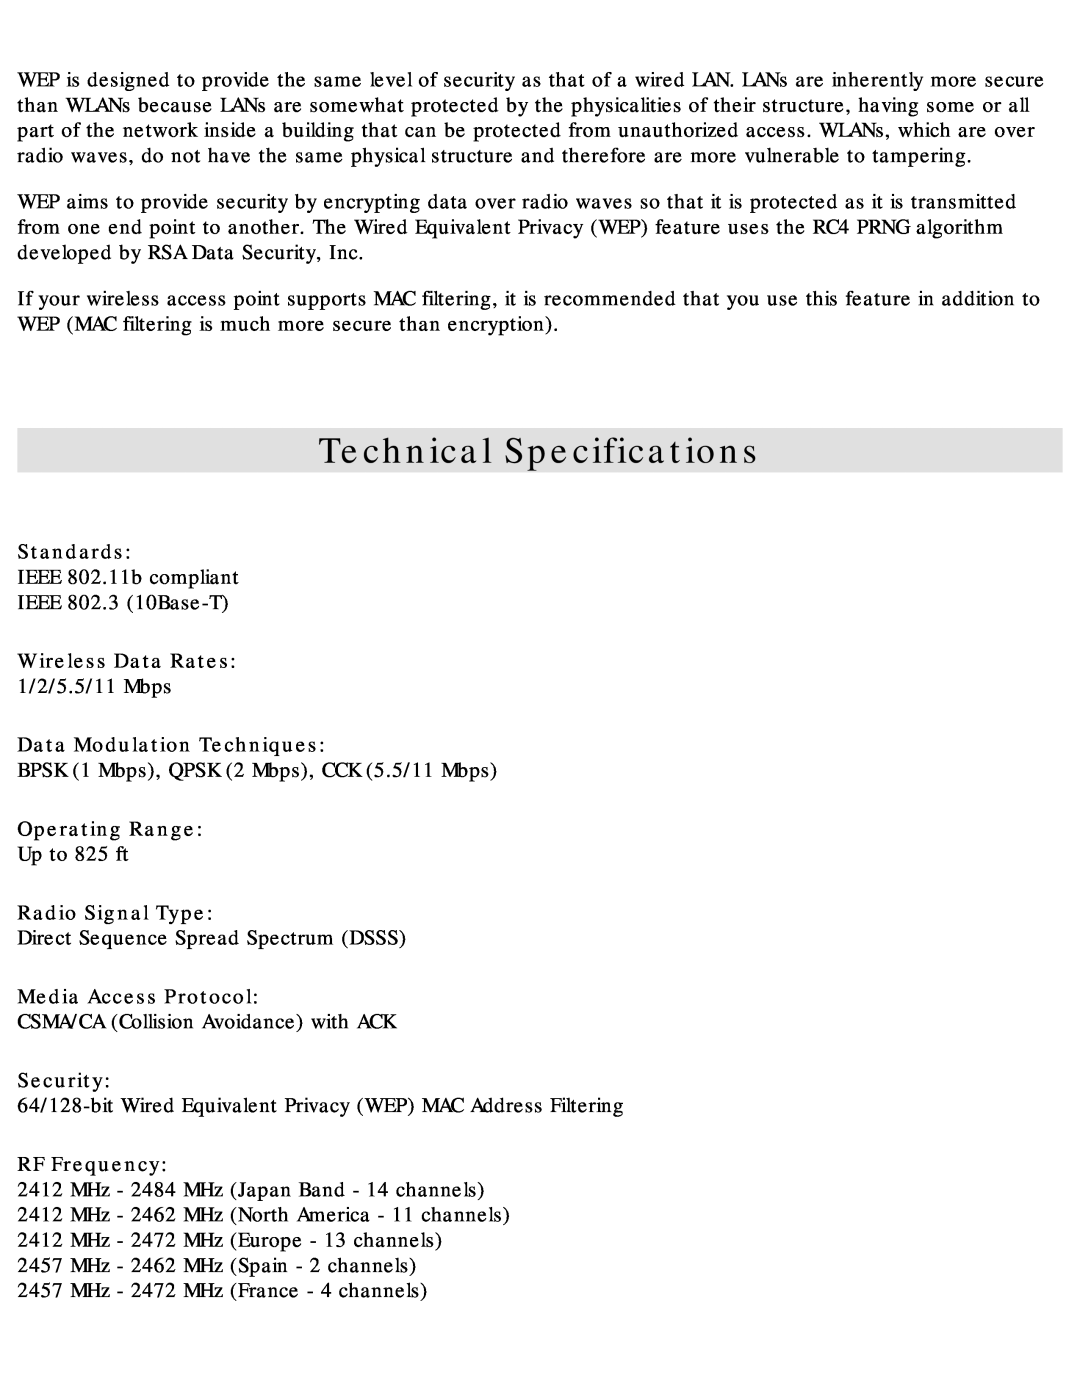 SMC Networks SMC2655W Technical Specifications, Standards, Wireless Data Rates, Data Modulation Techniques, Security 